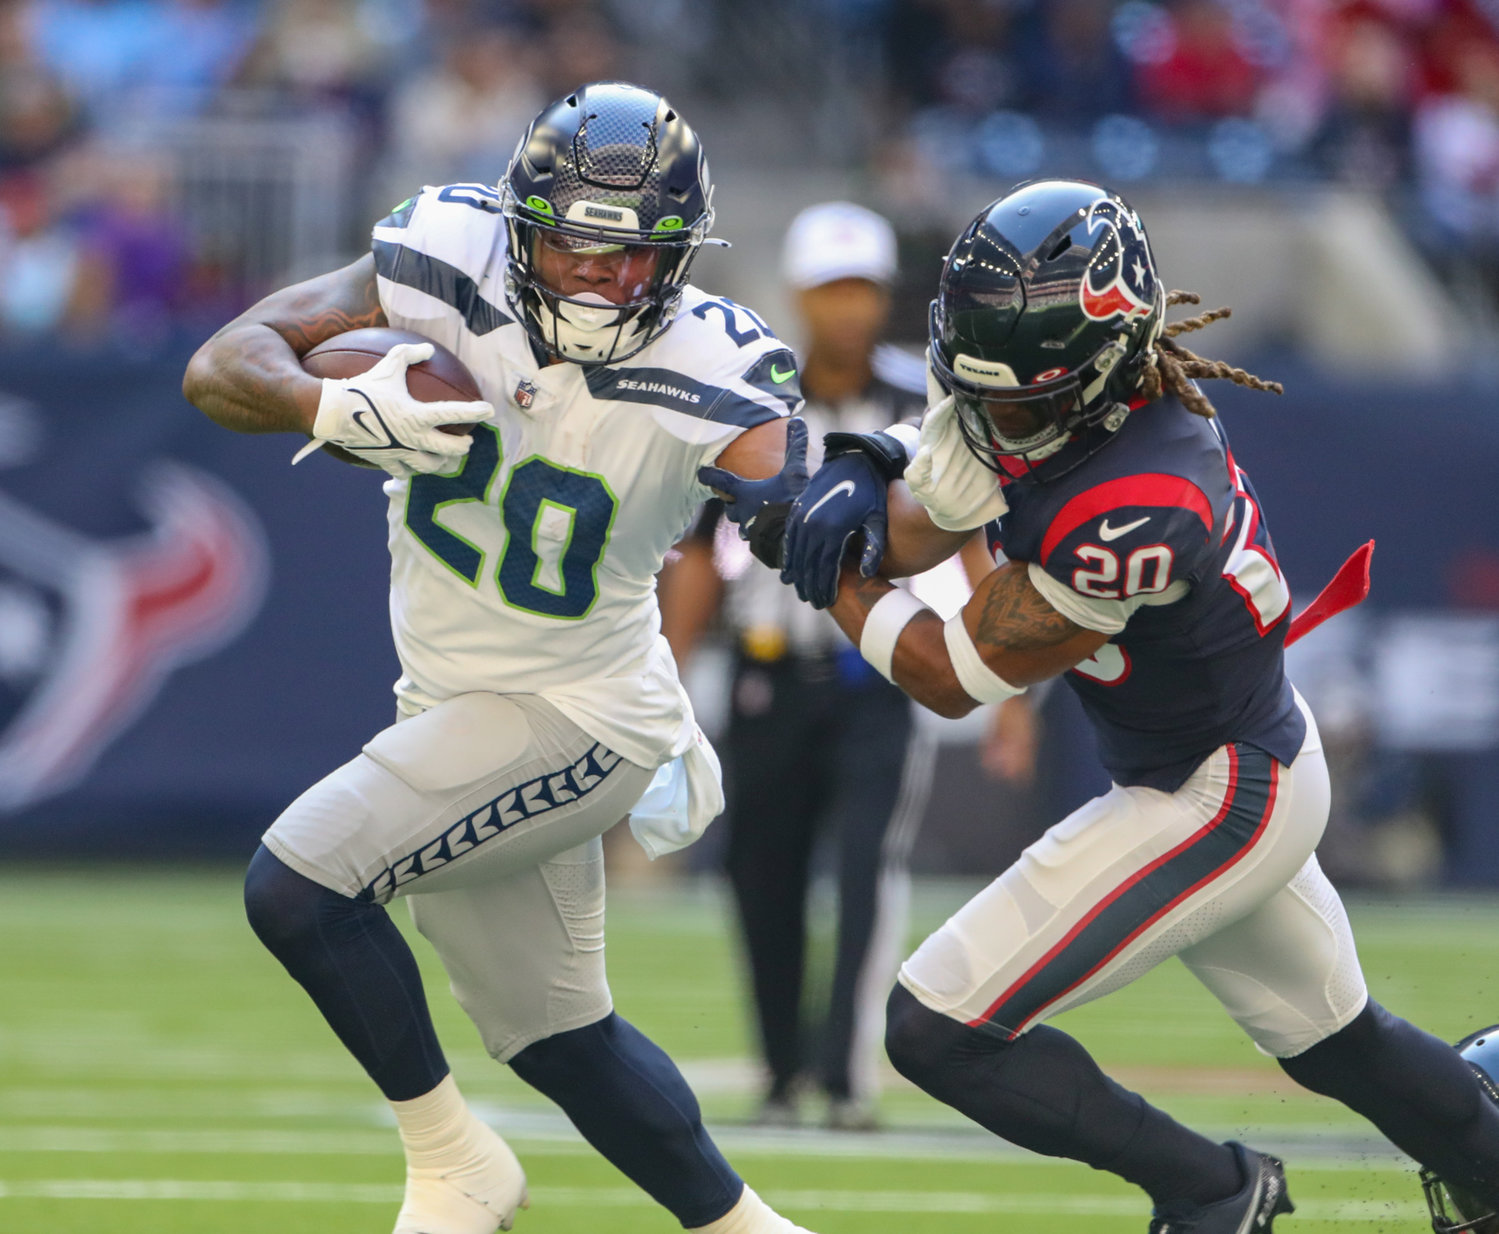 Seattle Seahawks running back Rashaad Penny (20) runs past Houston Texans safety Justin Reid (20) during the first half of an NFL game between the Seahawks and the Texans on December 12, 2021 in Houston, Texas.